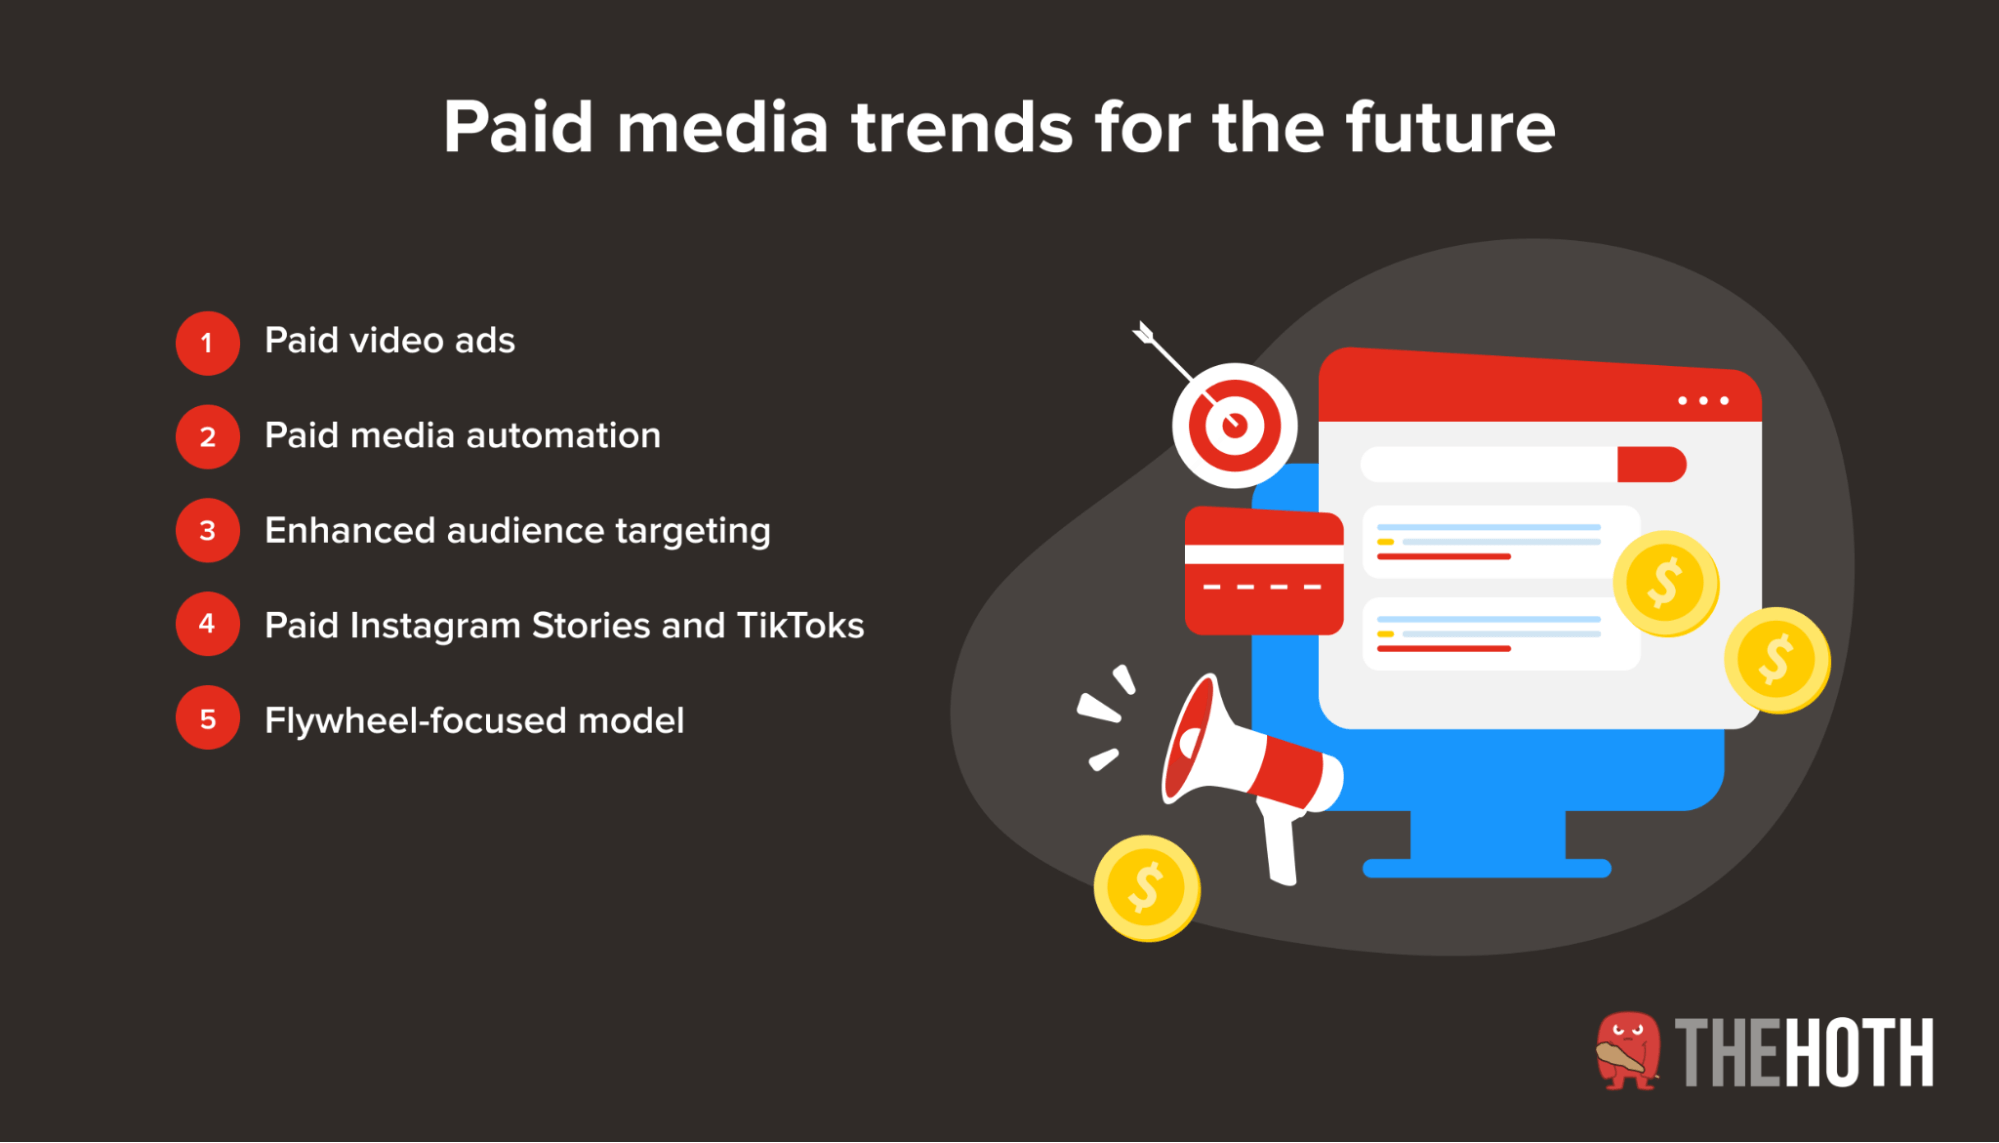 5 trends for paid media going forward